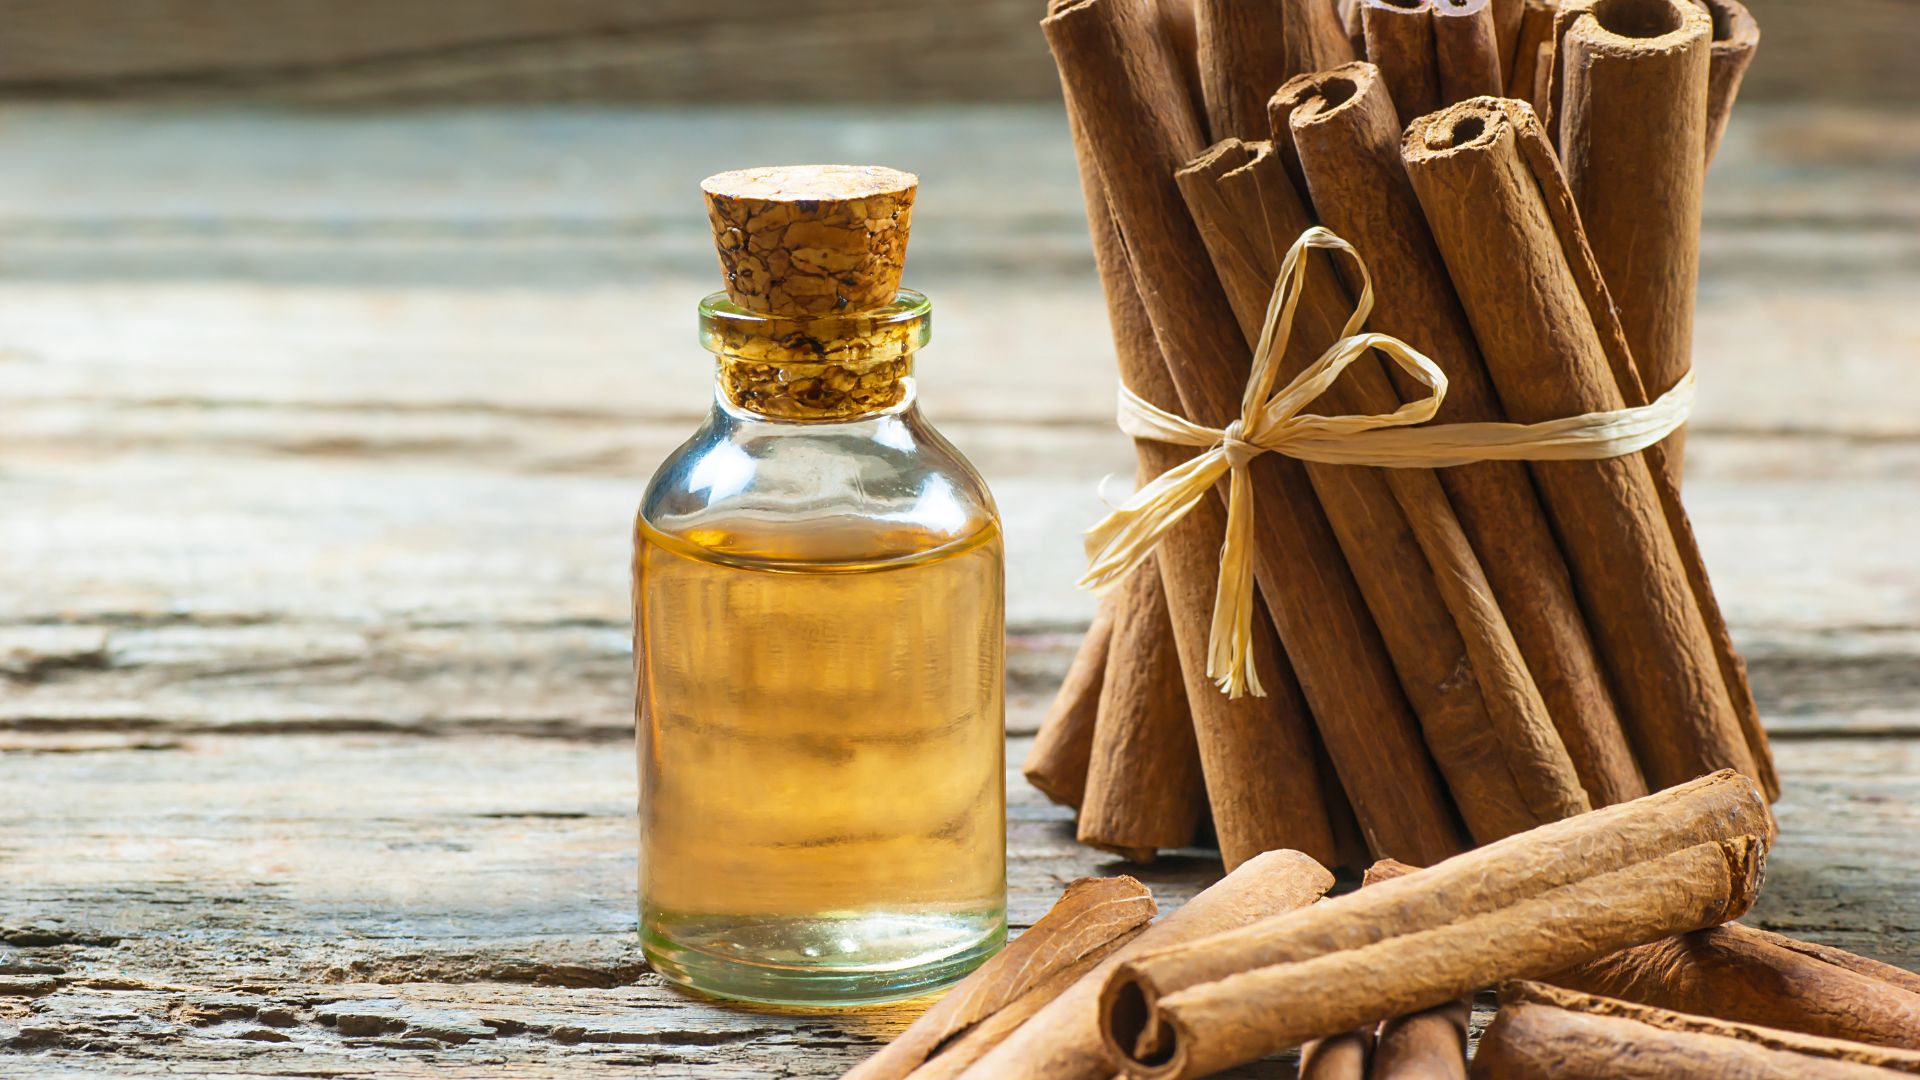 Plant Lovers Swear By This Cinnamon Trick For Healing Broken Stems, But Does It Actually Work?